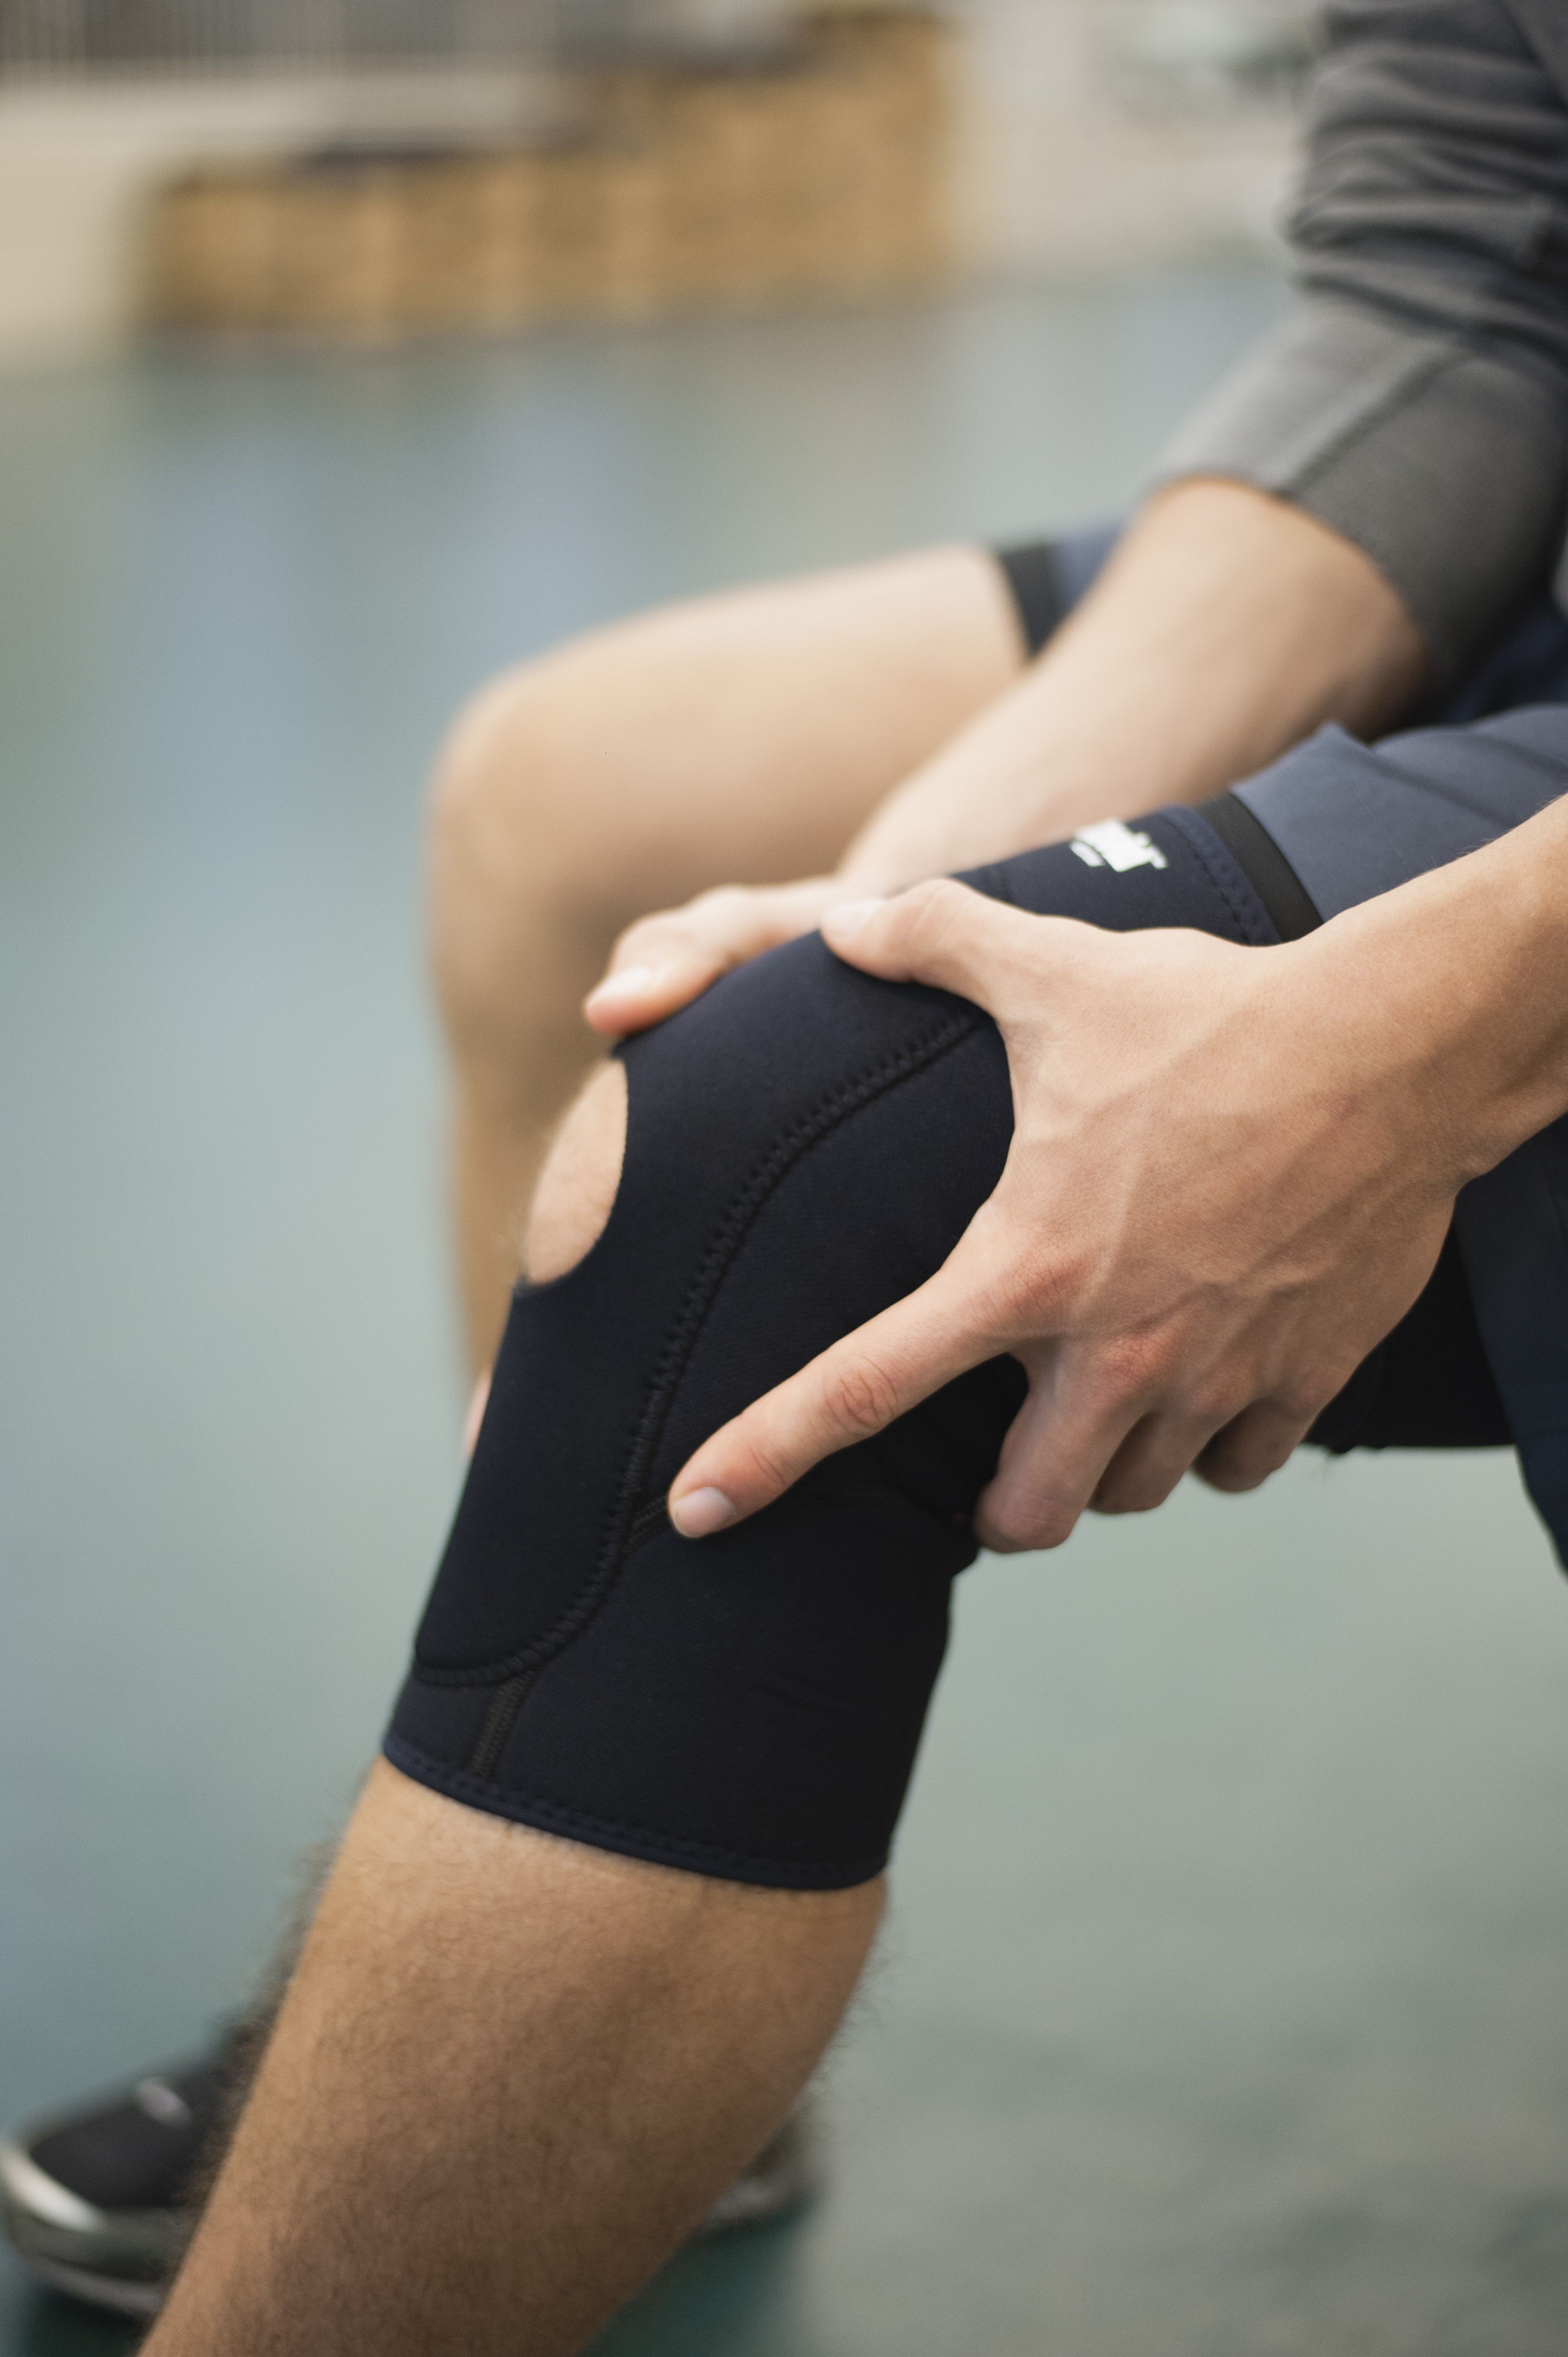 How to Cure Quad Pain, Calf Pain, and Heavy Legs